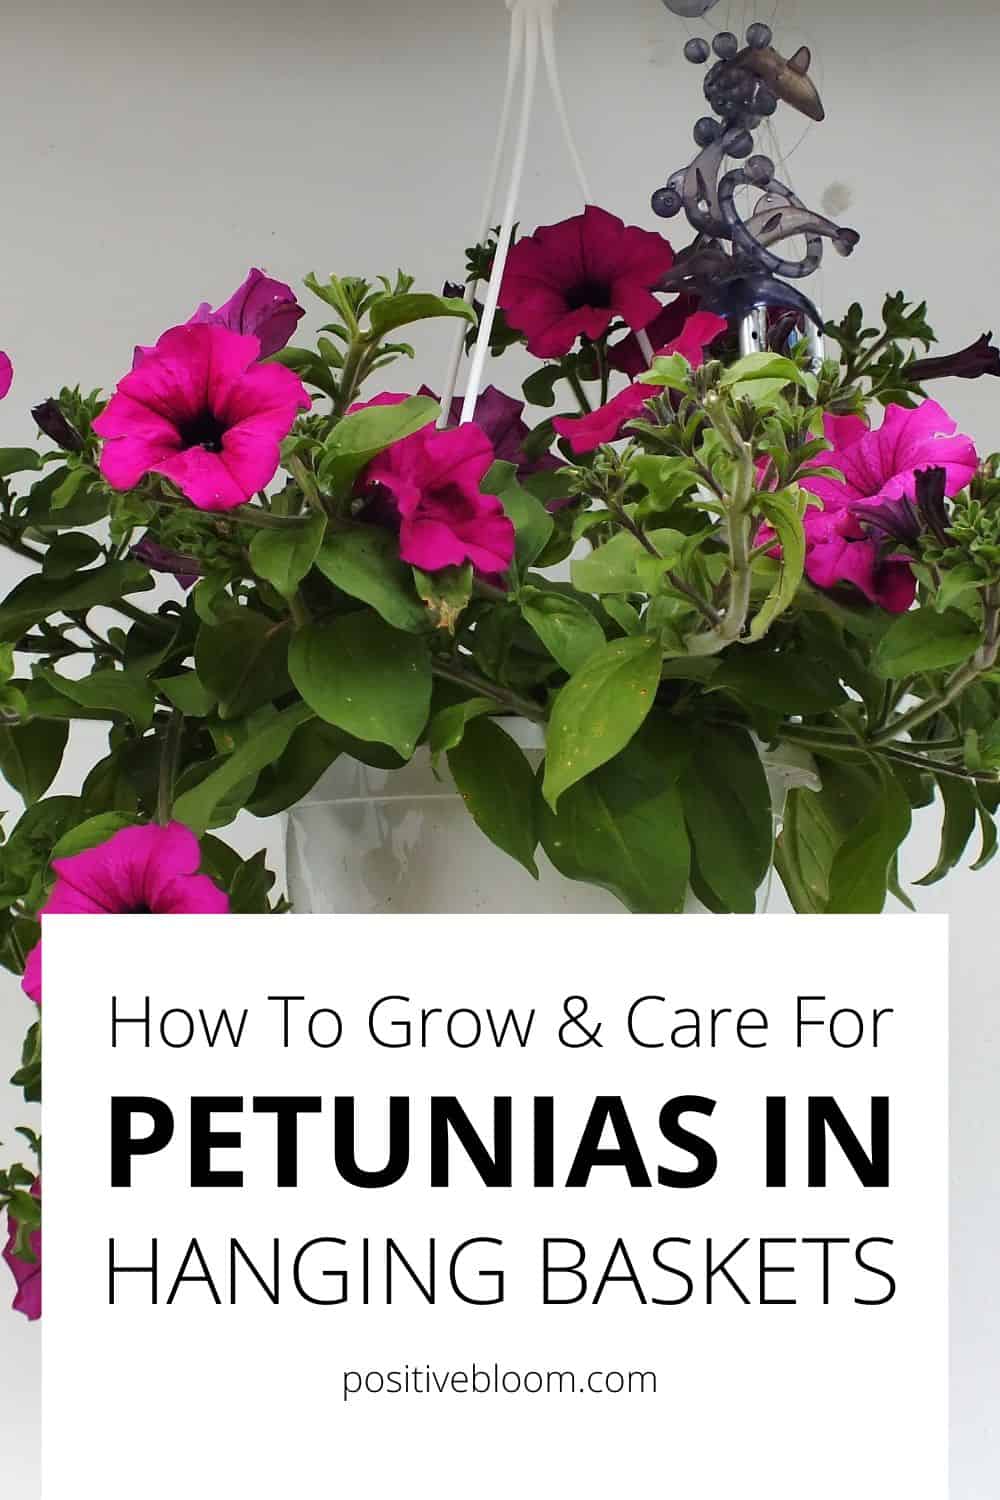 How To Grow & Care For Petunias In Hanging Baskets Pinterest